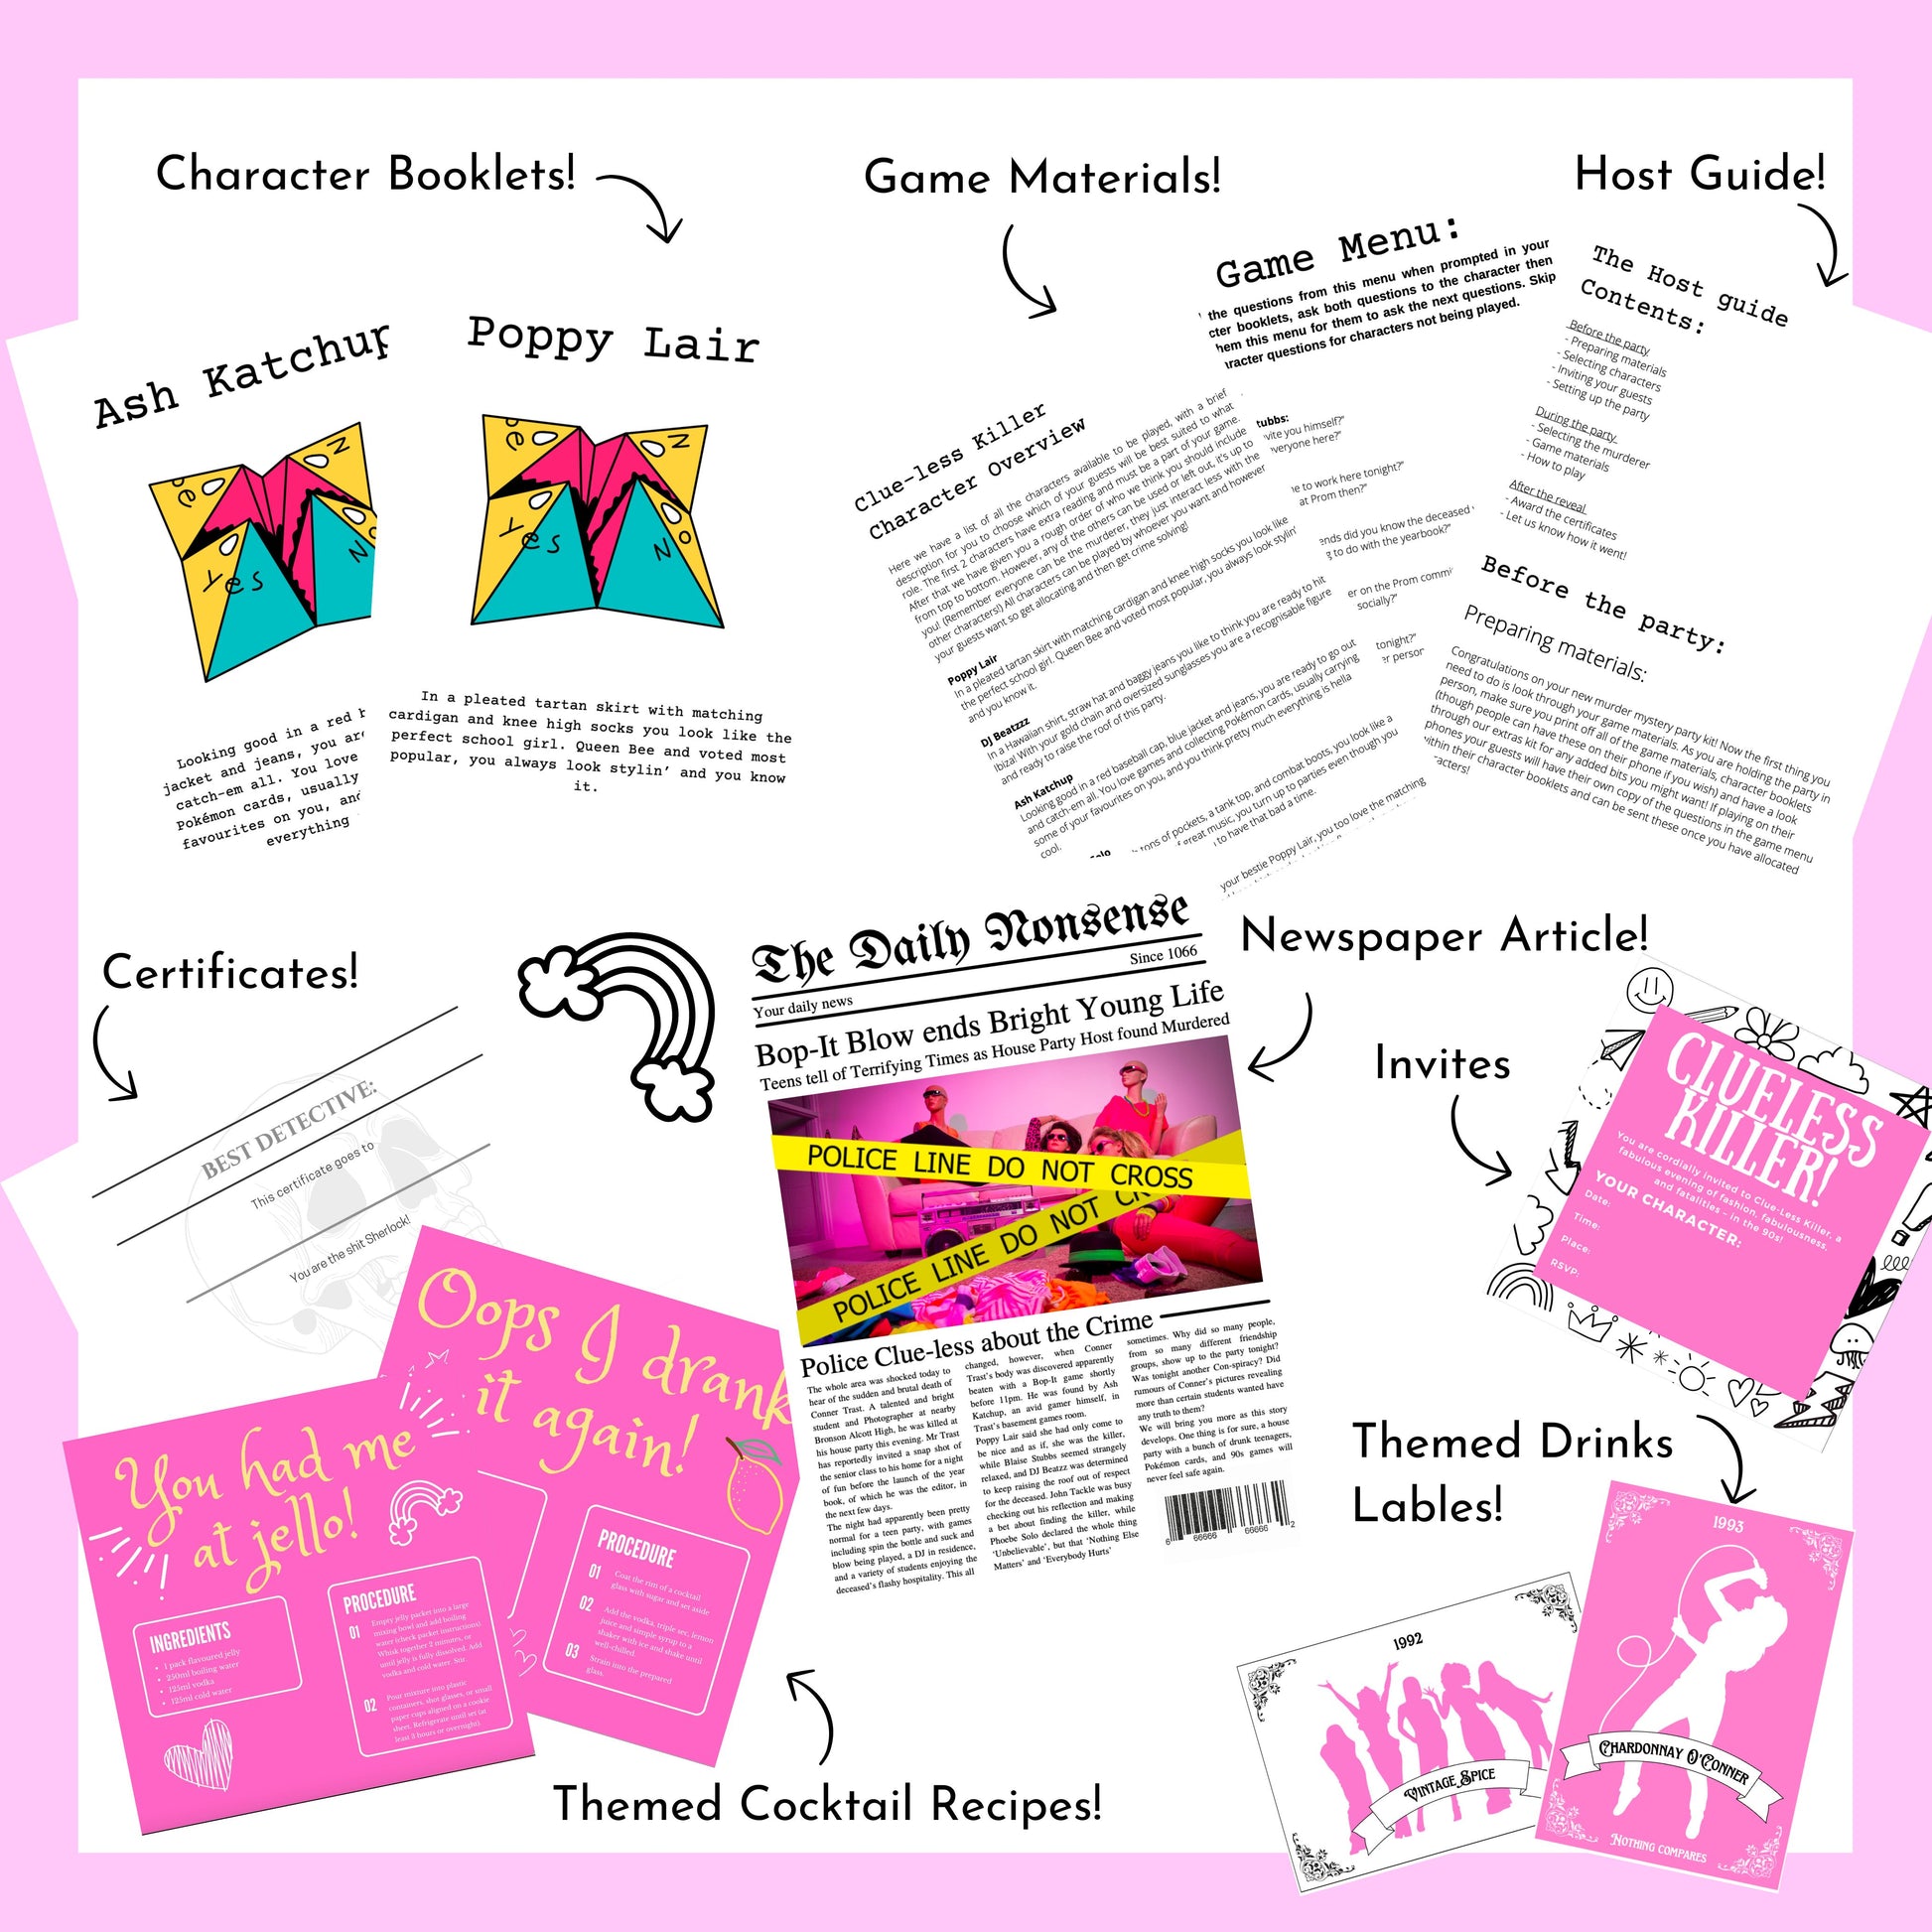 Character booklets, game materials, a host guide, newspaper article, certificates, themed cocktails and drink labels, and printable invitations